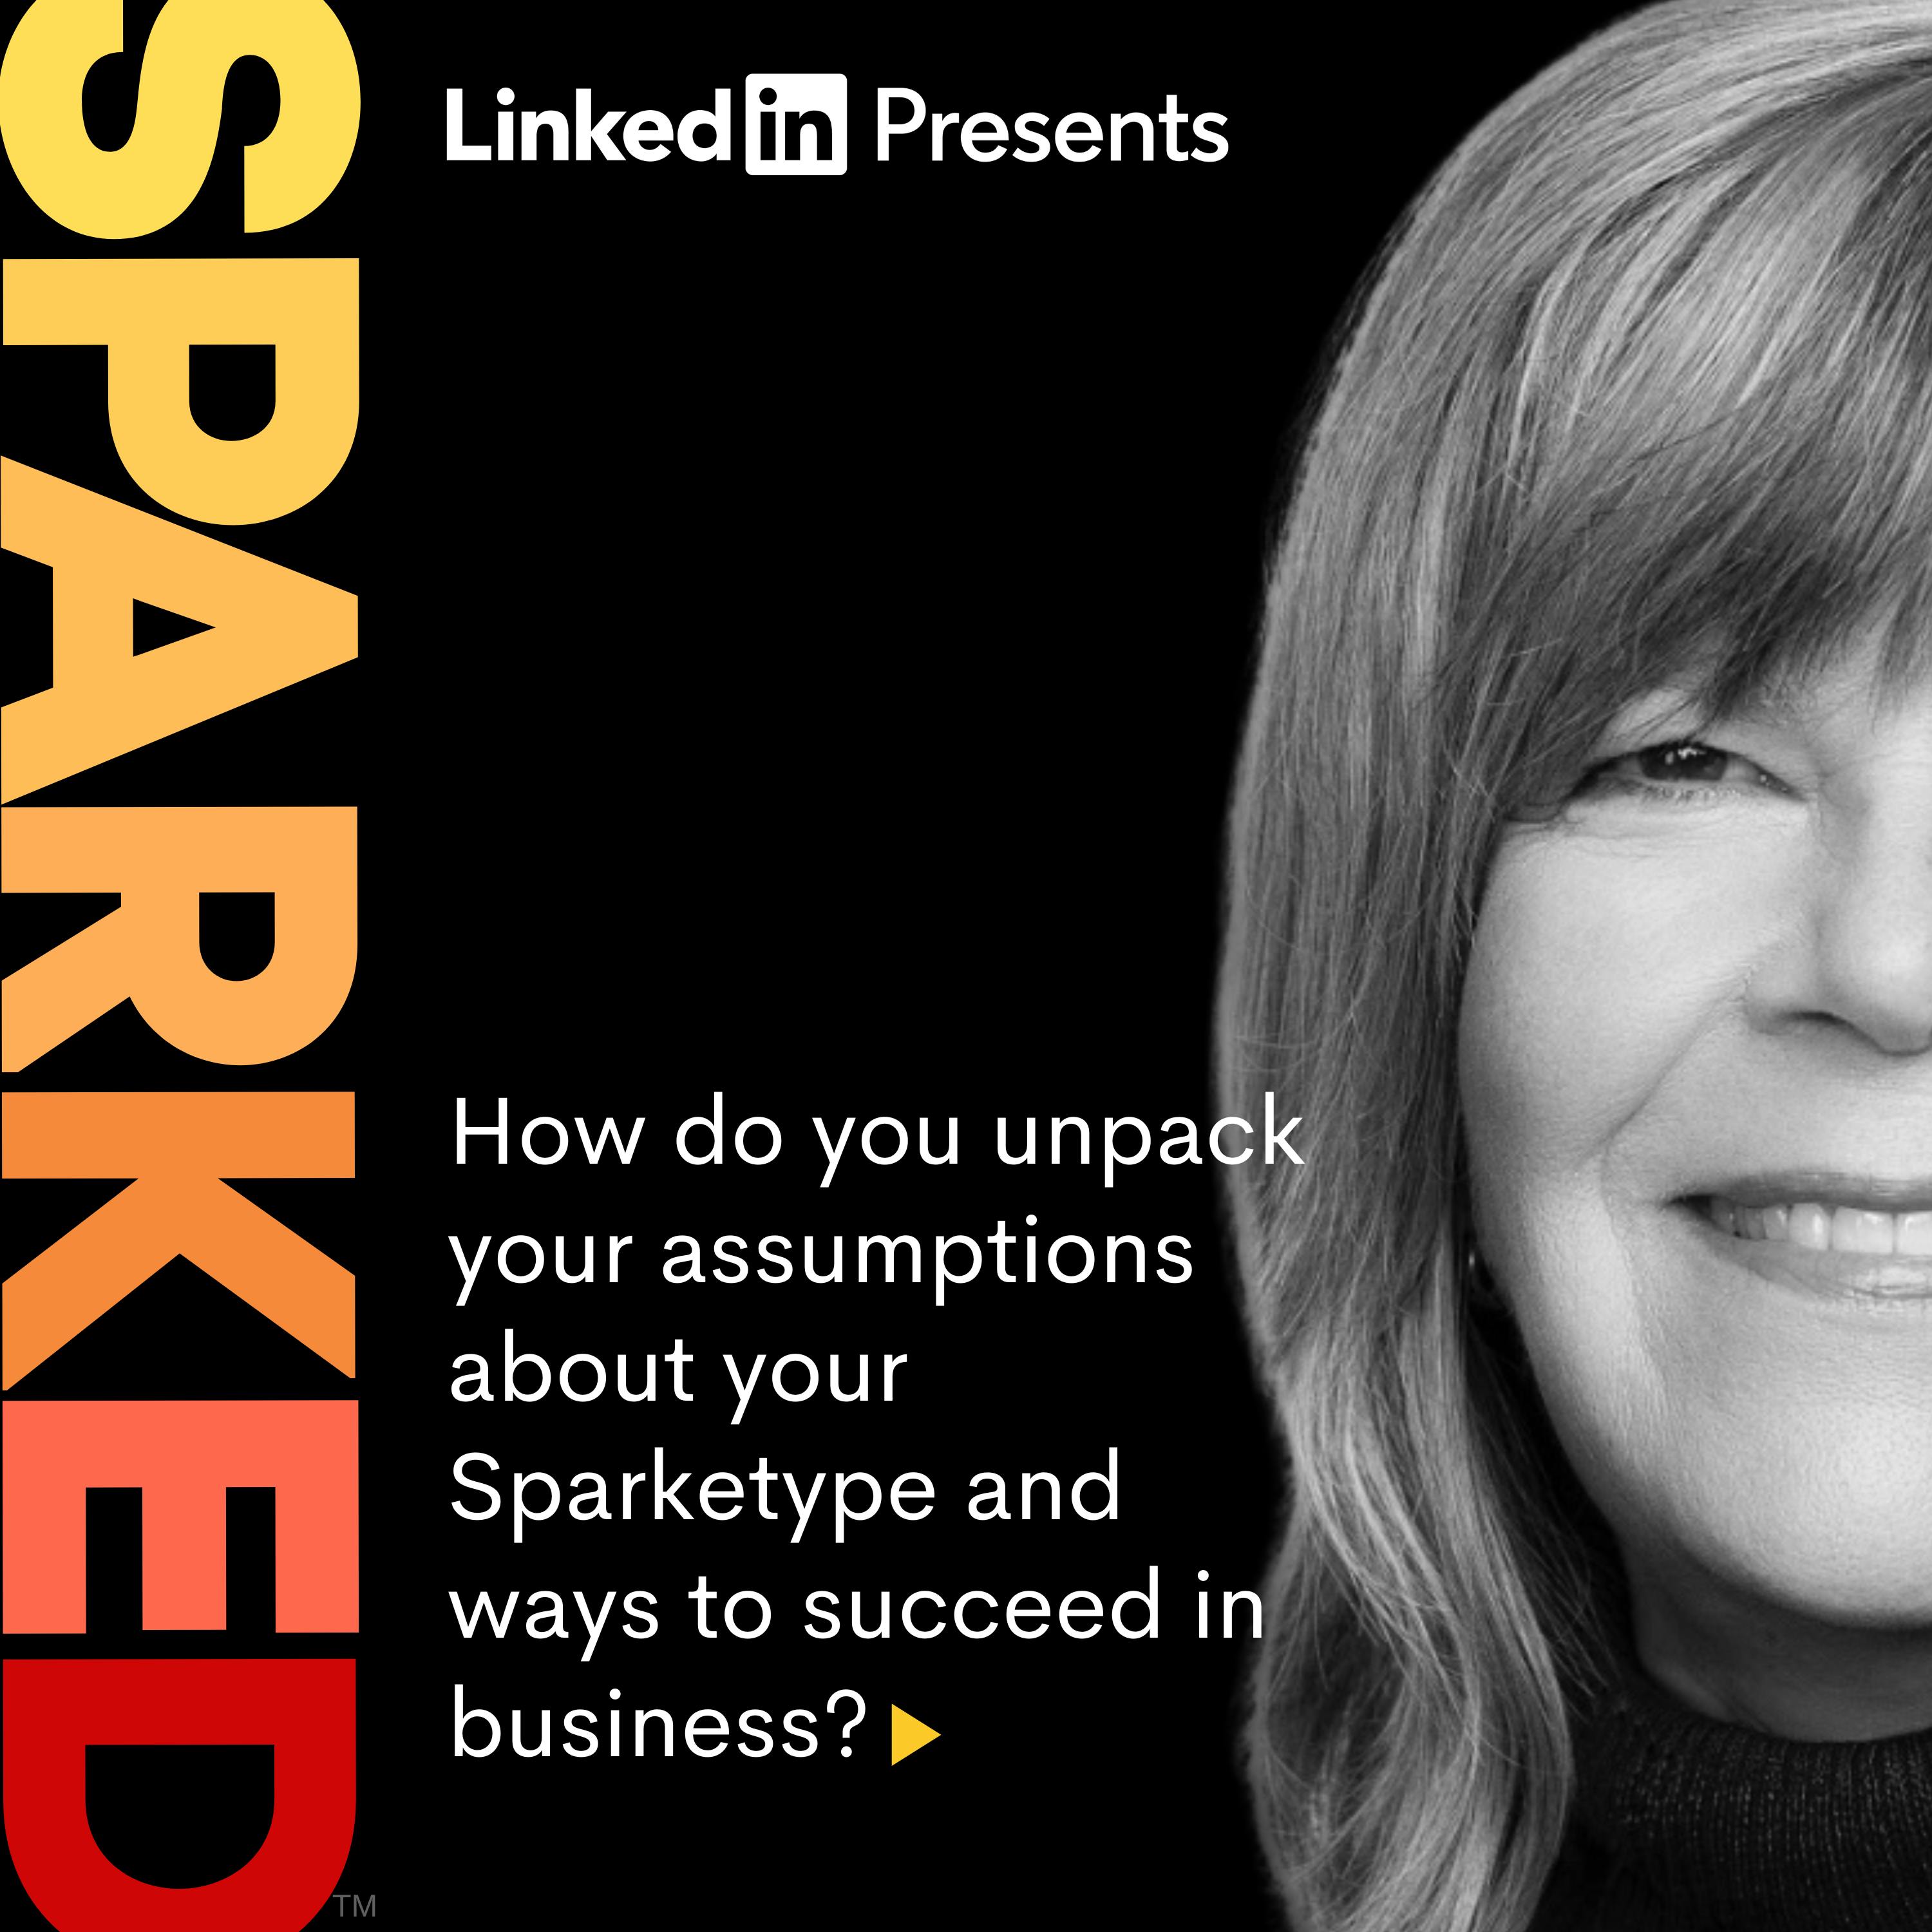 How to Unpack Assumptions about your Sparketypes